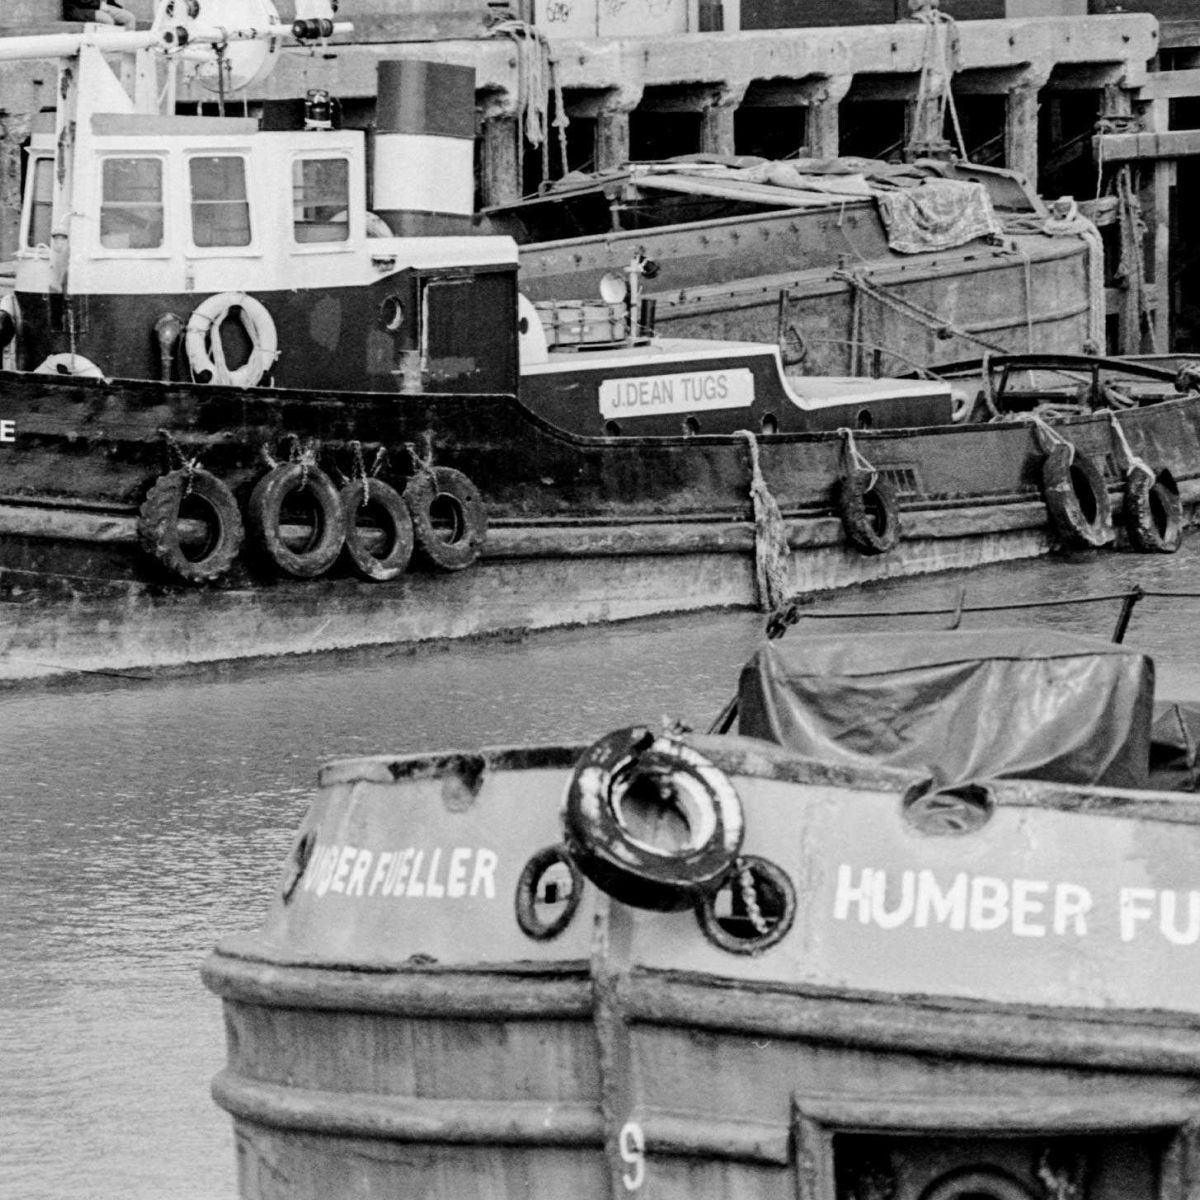 Humber Fueller Another Rix Fuel Barge And The Tug Primrose Operated By J Dean Out Of King George Dock